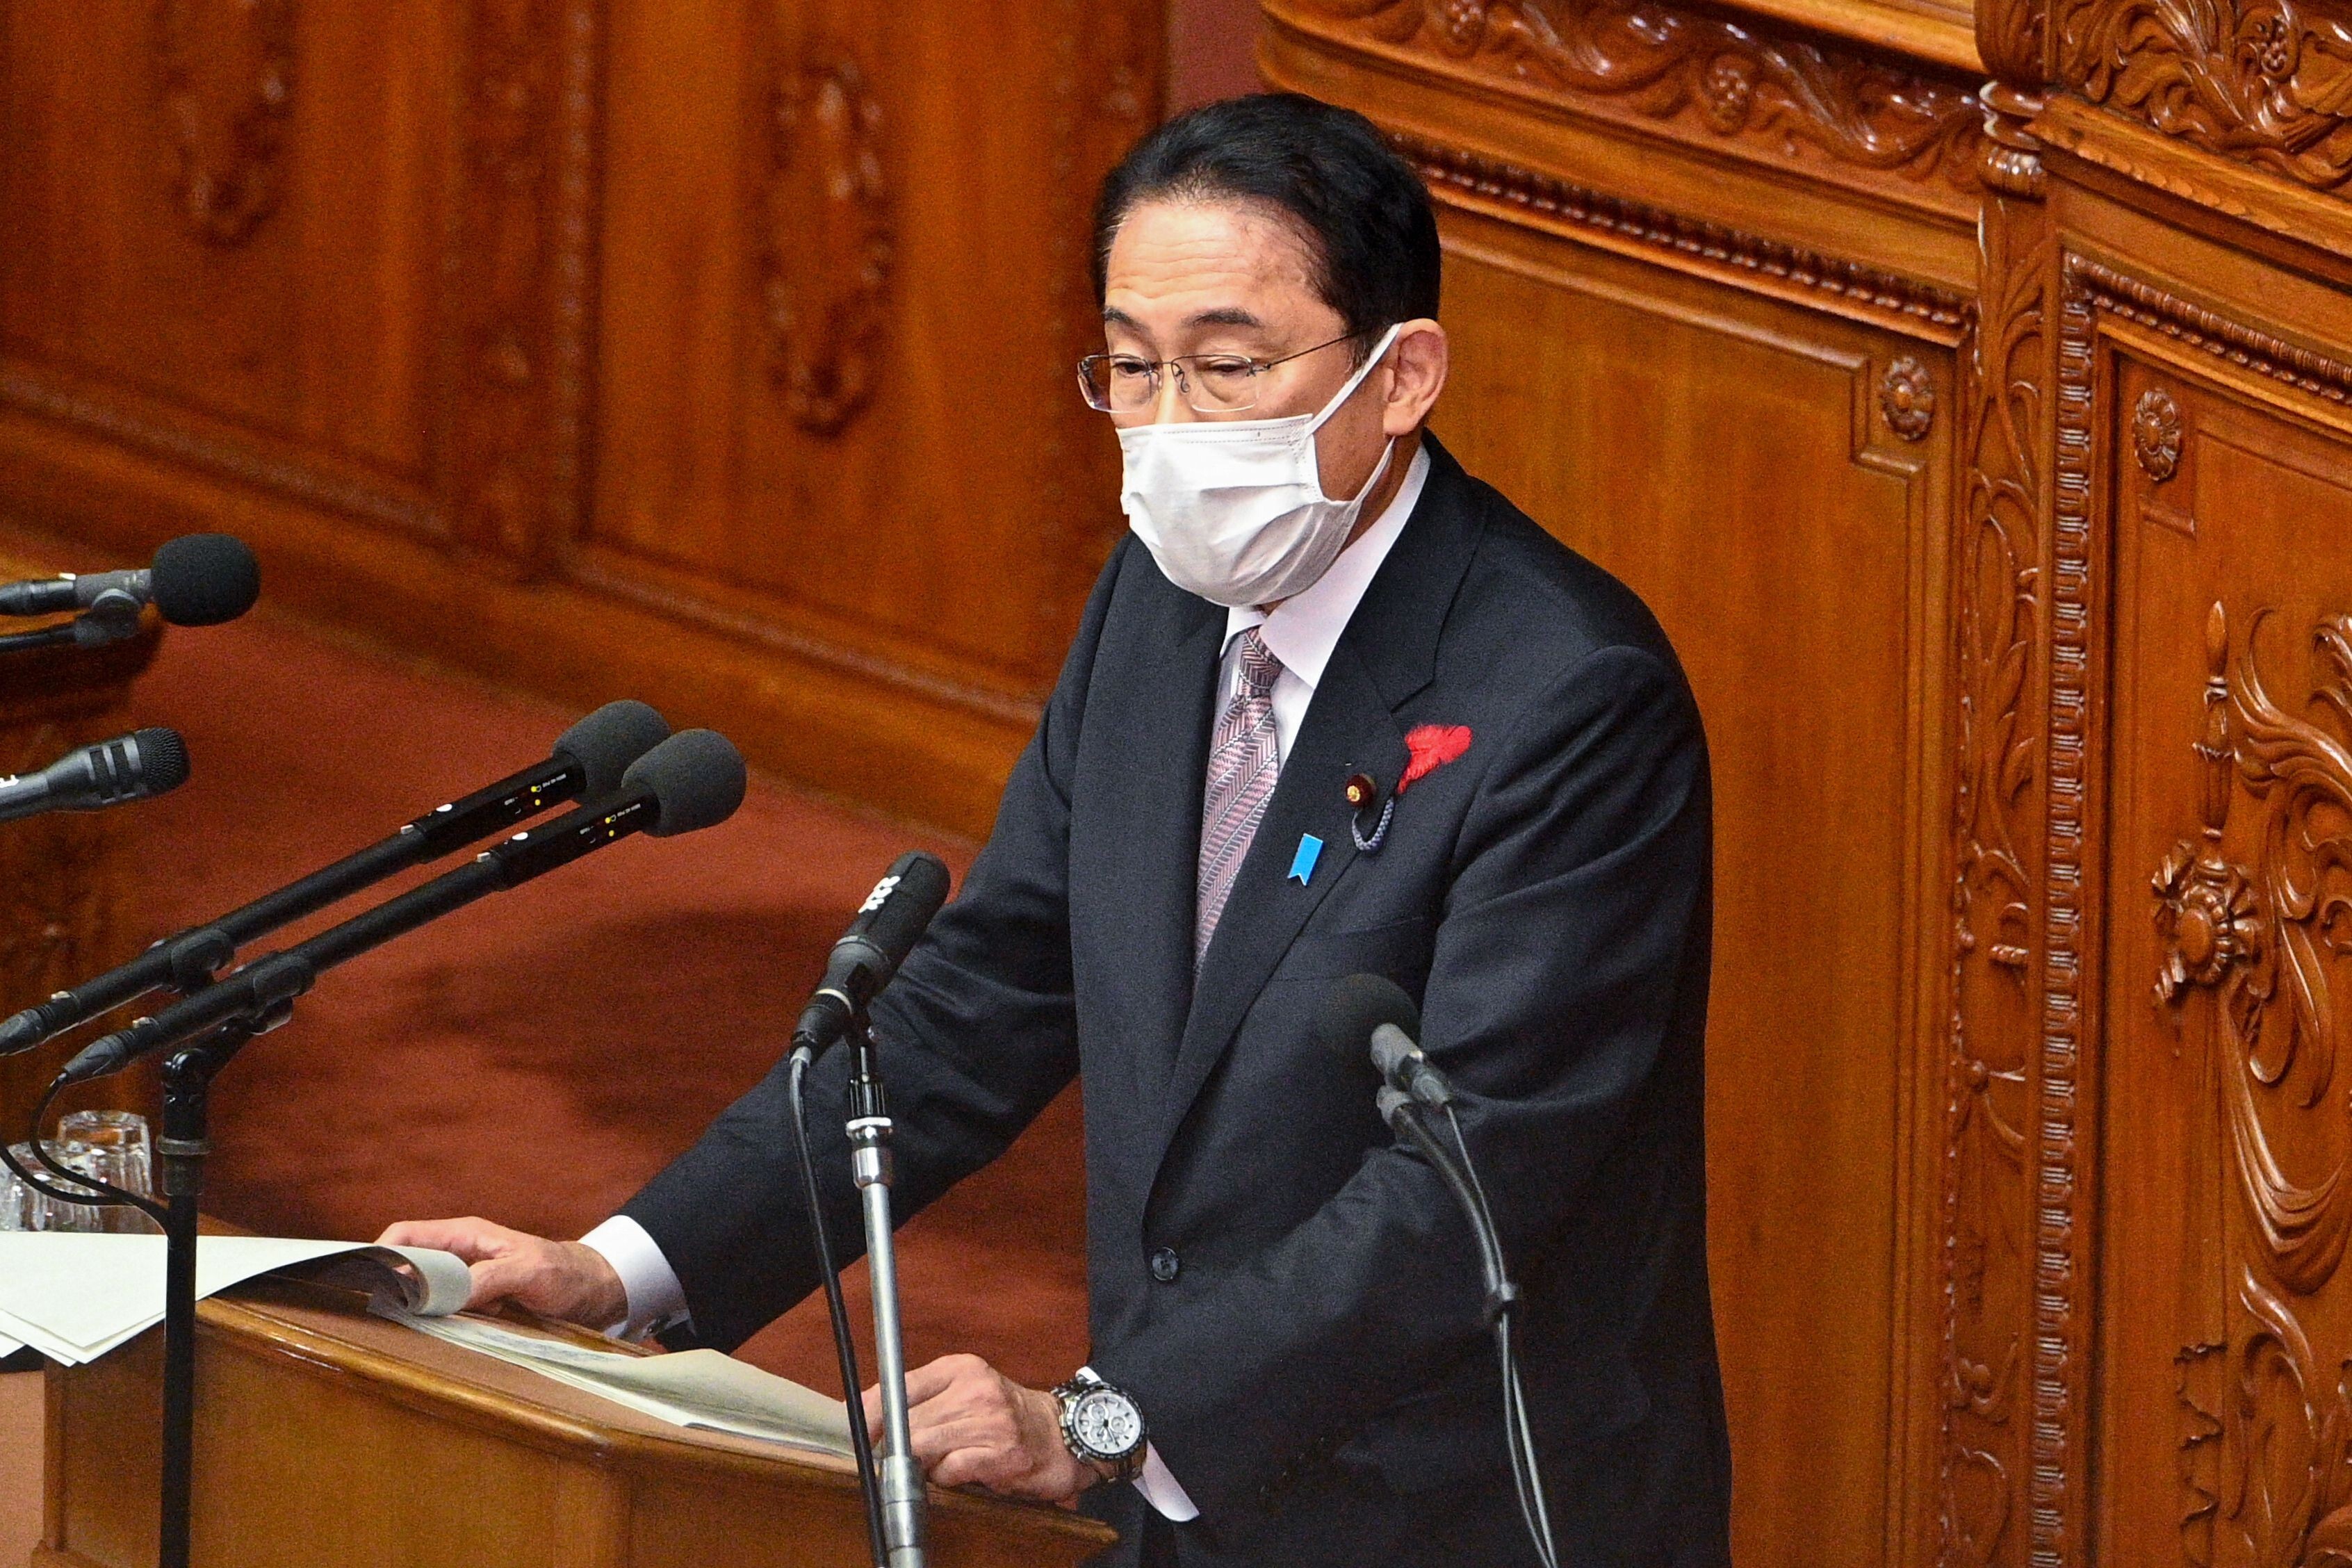 Japan’s new PM Fumio Kishida speaks at the lower house of parliament in Tokyo on October 11, 2021. Photo: AFP